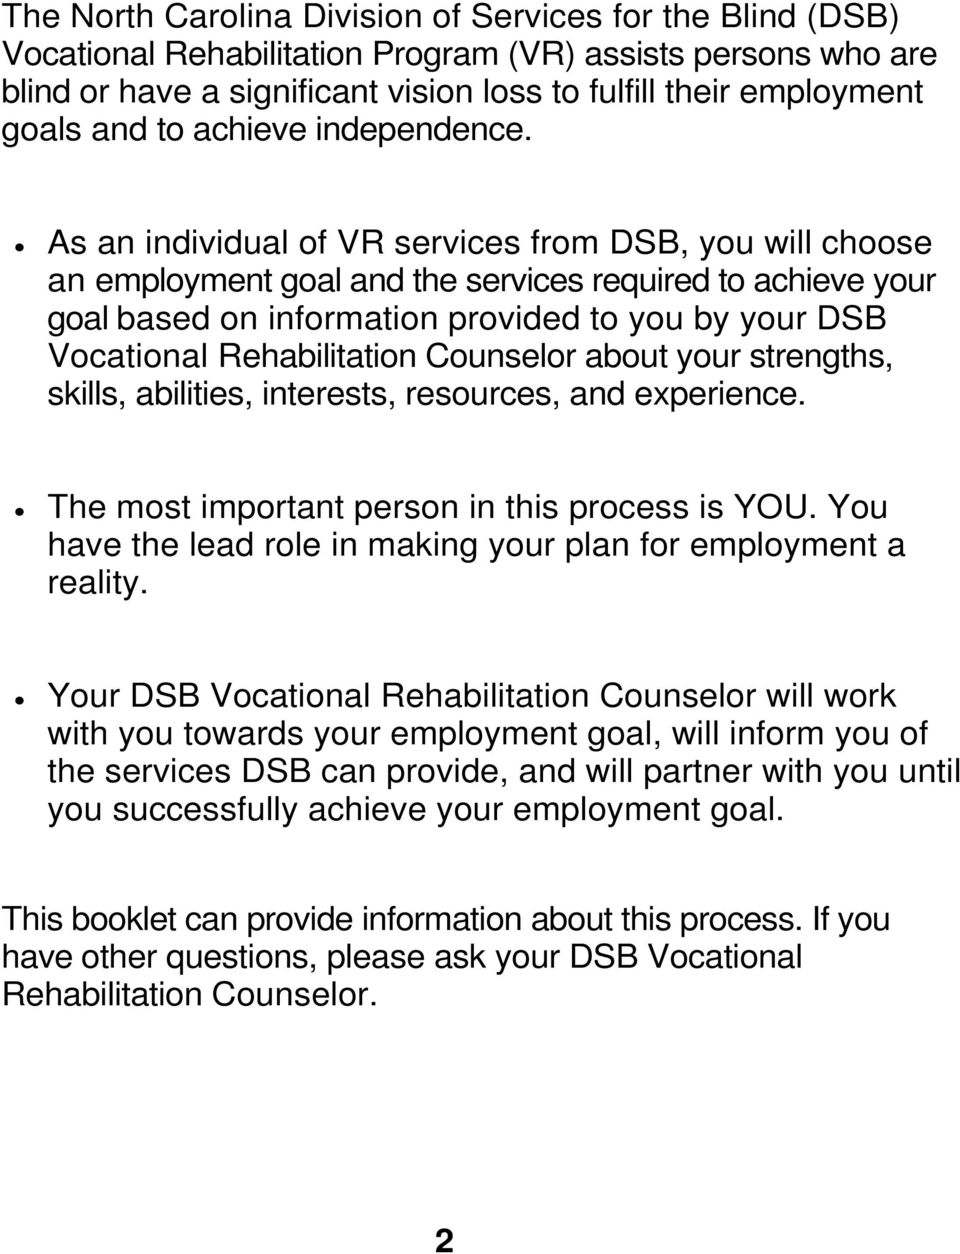 As an individual of VR services from DSB, you will choose an employment goal and the services required to achieve your goal based on information provided to you by your DSB Vocational Rehabilitation